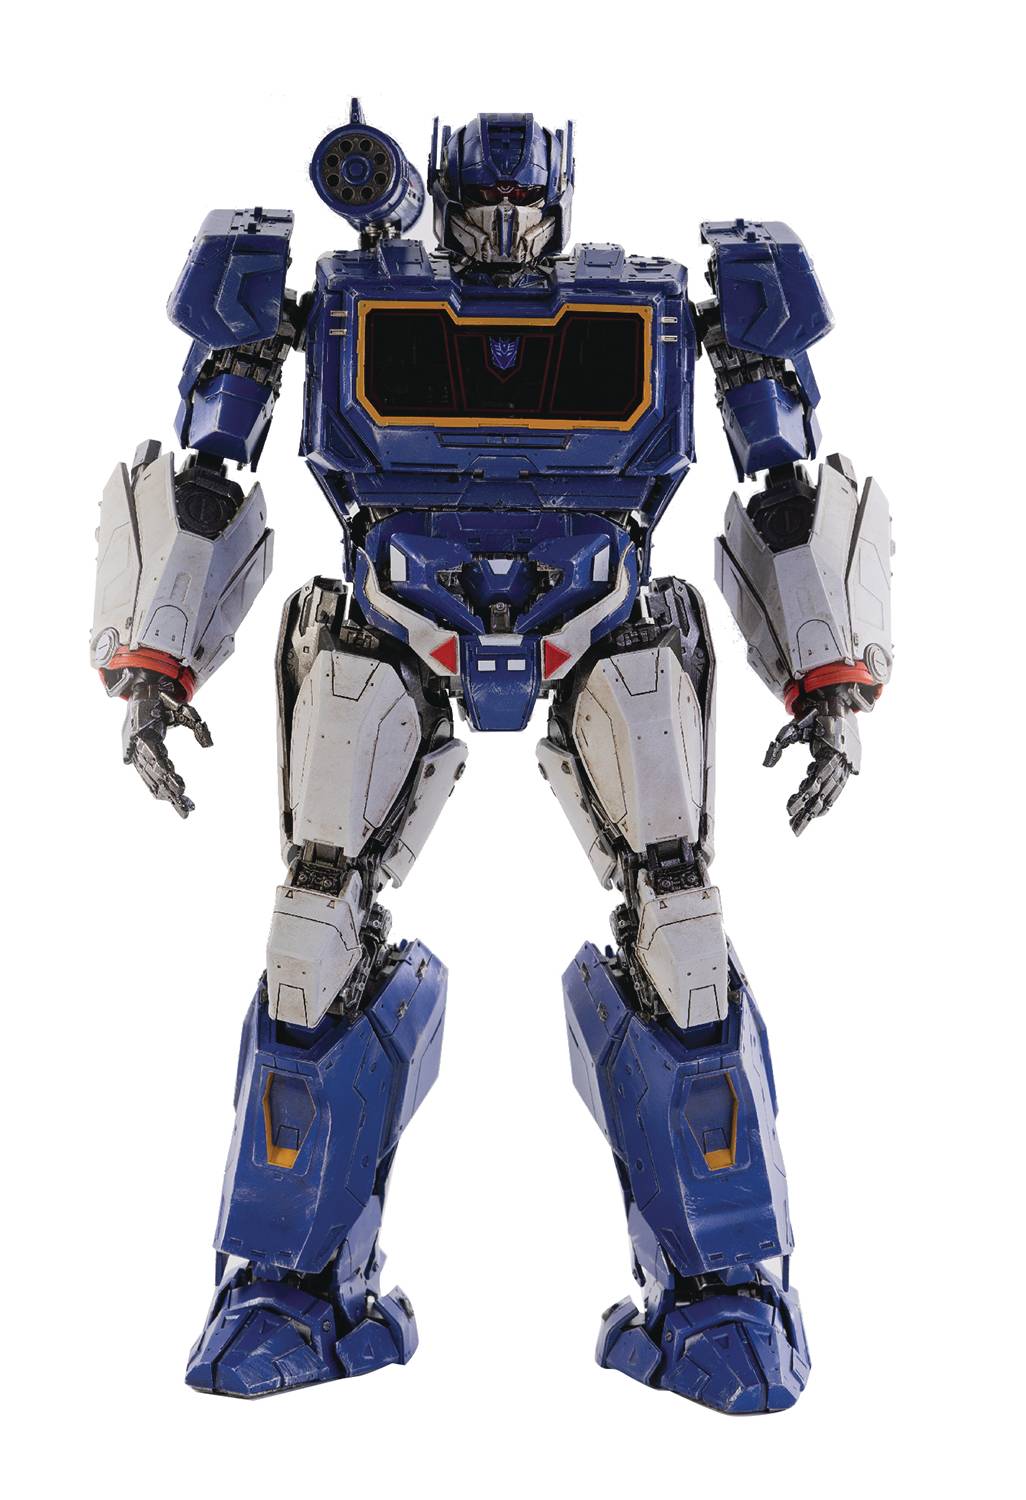 TRANSFORMERS BUMBLEBEE SOUNDWAVE DLX SCALE FIG